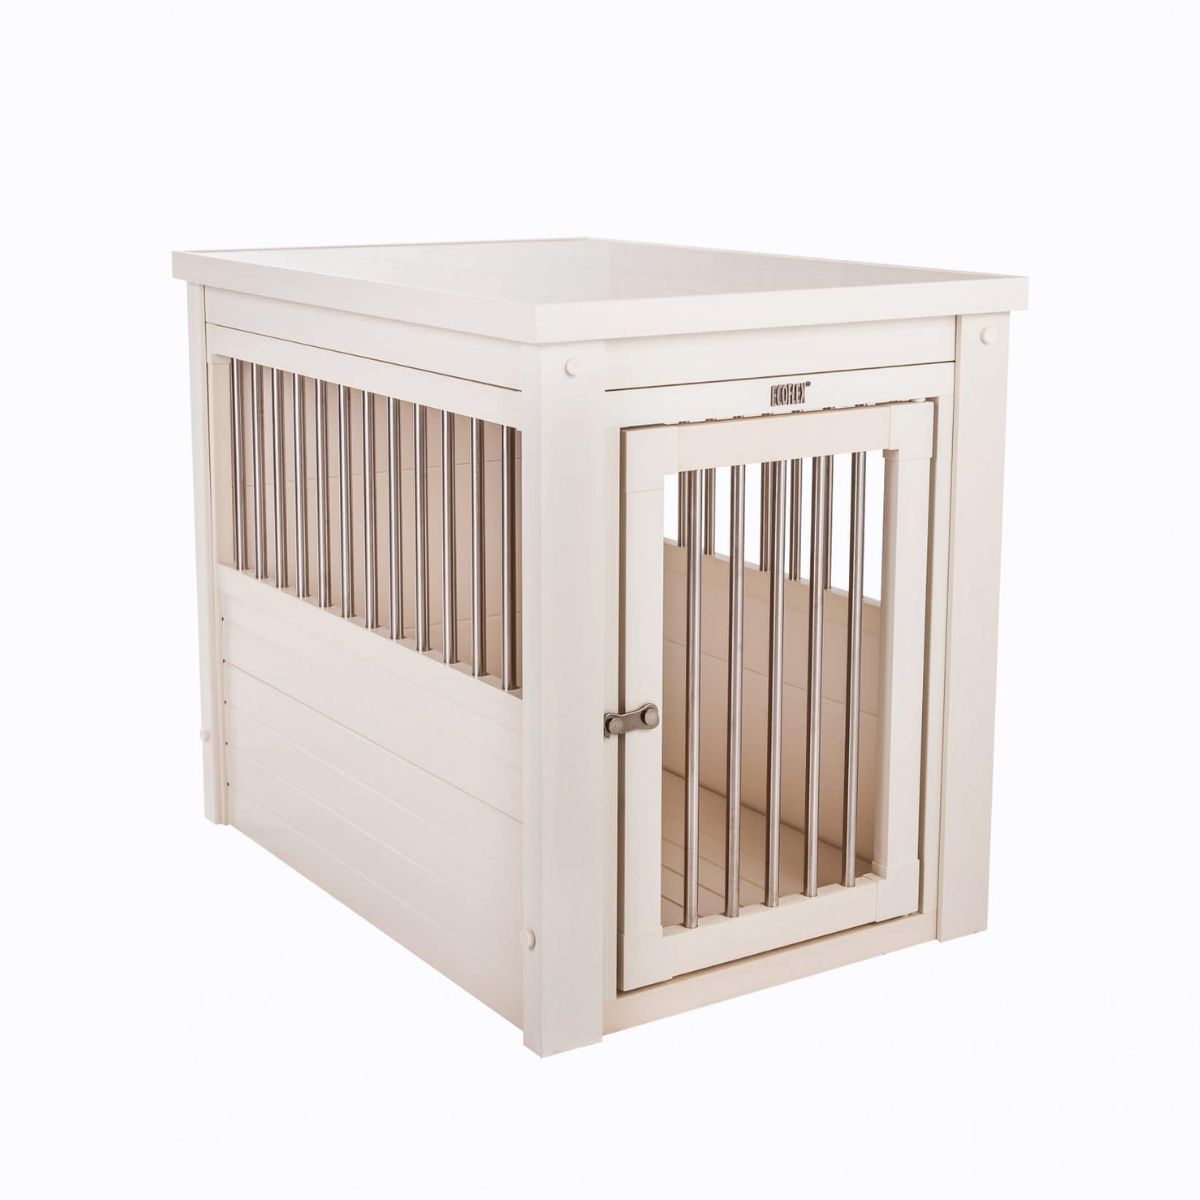 New Age Pet InnPlace Dog Crate Extra Large